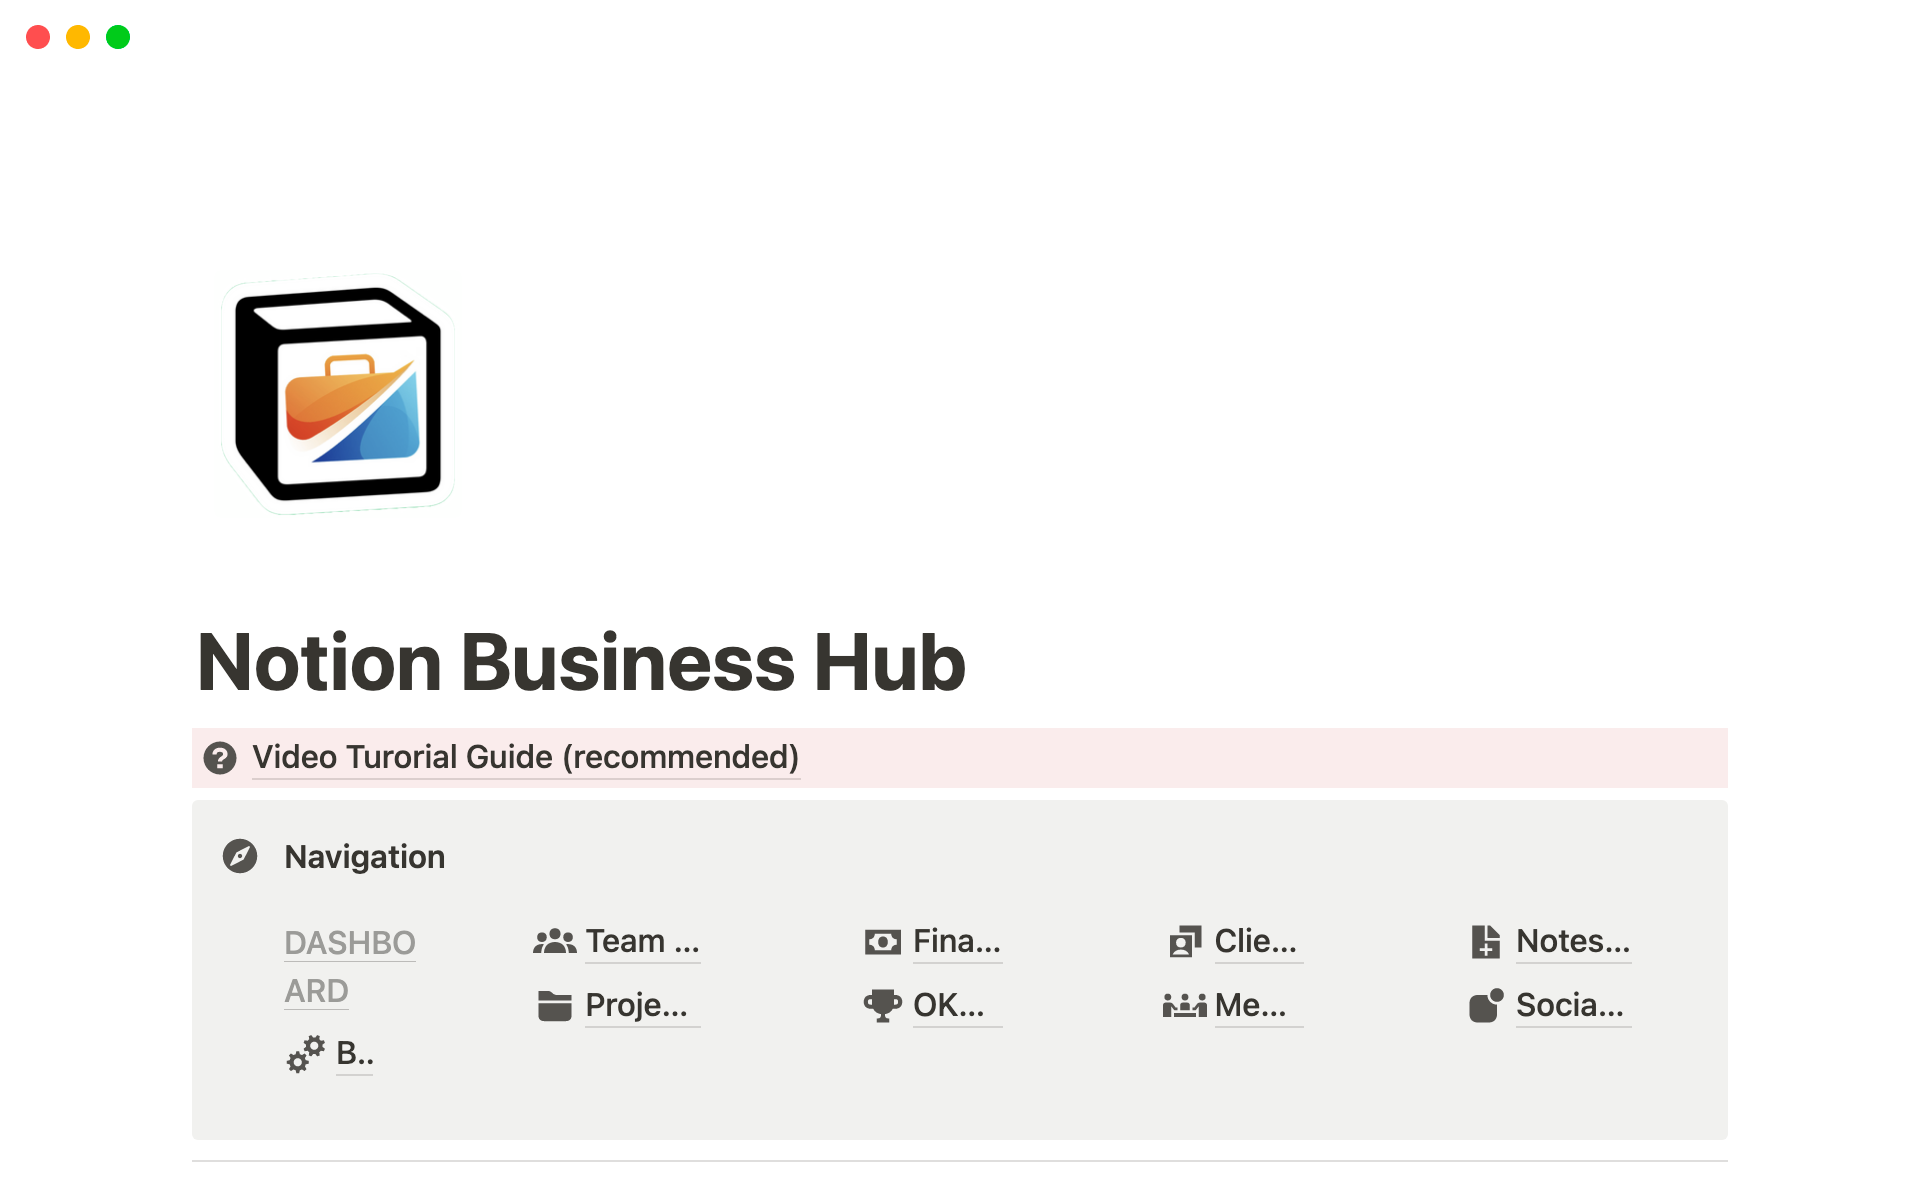 Business Hub is an all in one management hub for businesses, companies, freelancers, creators and agencies